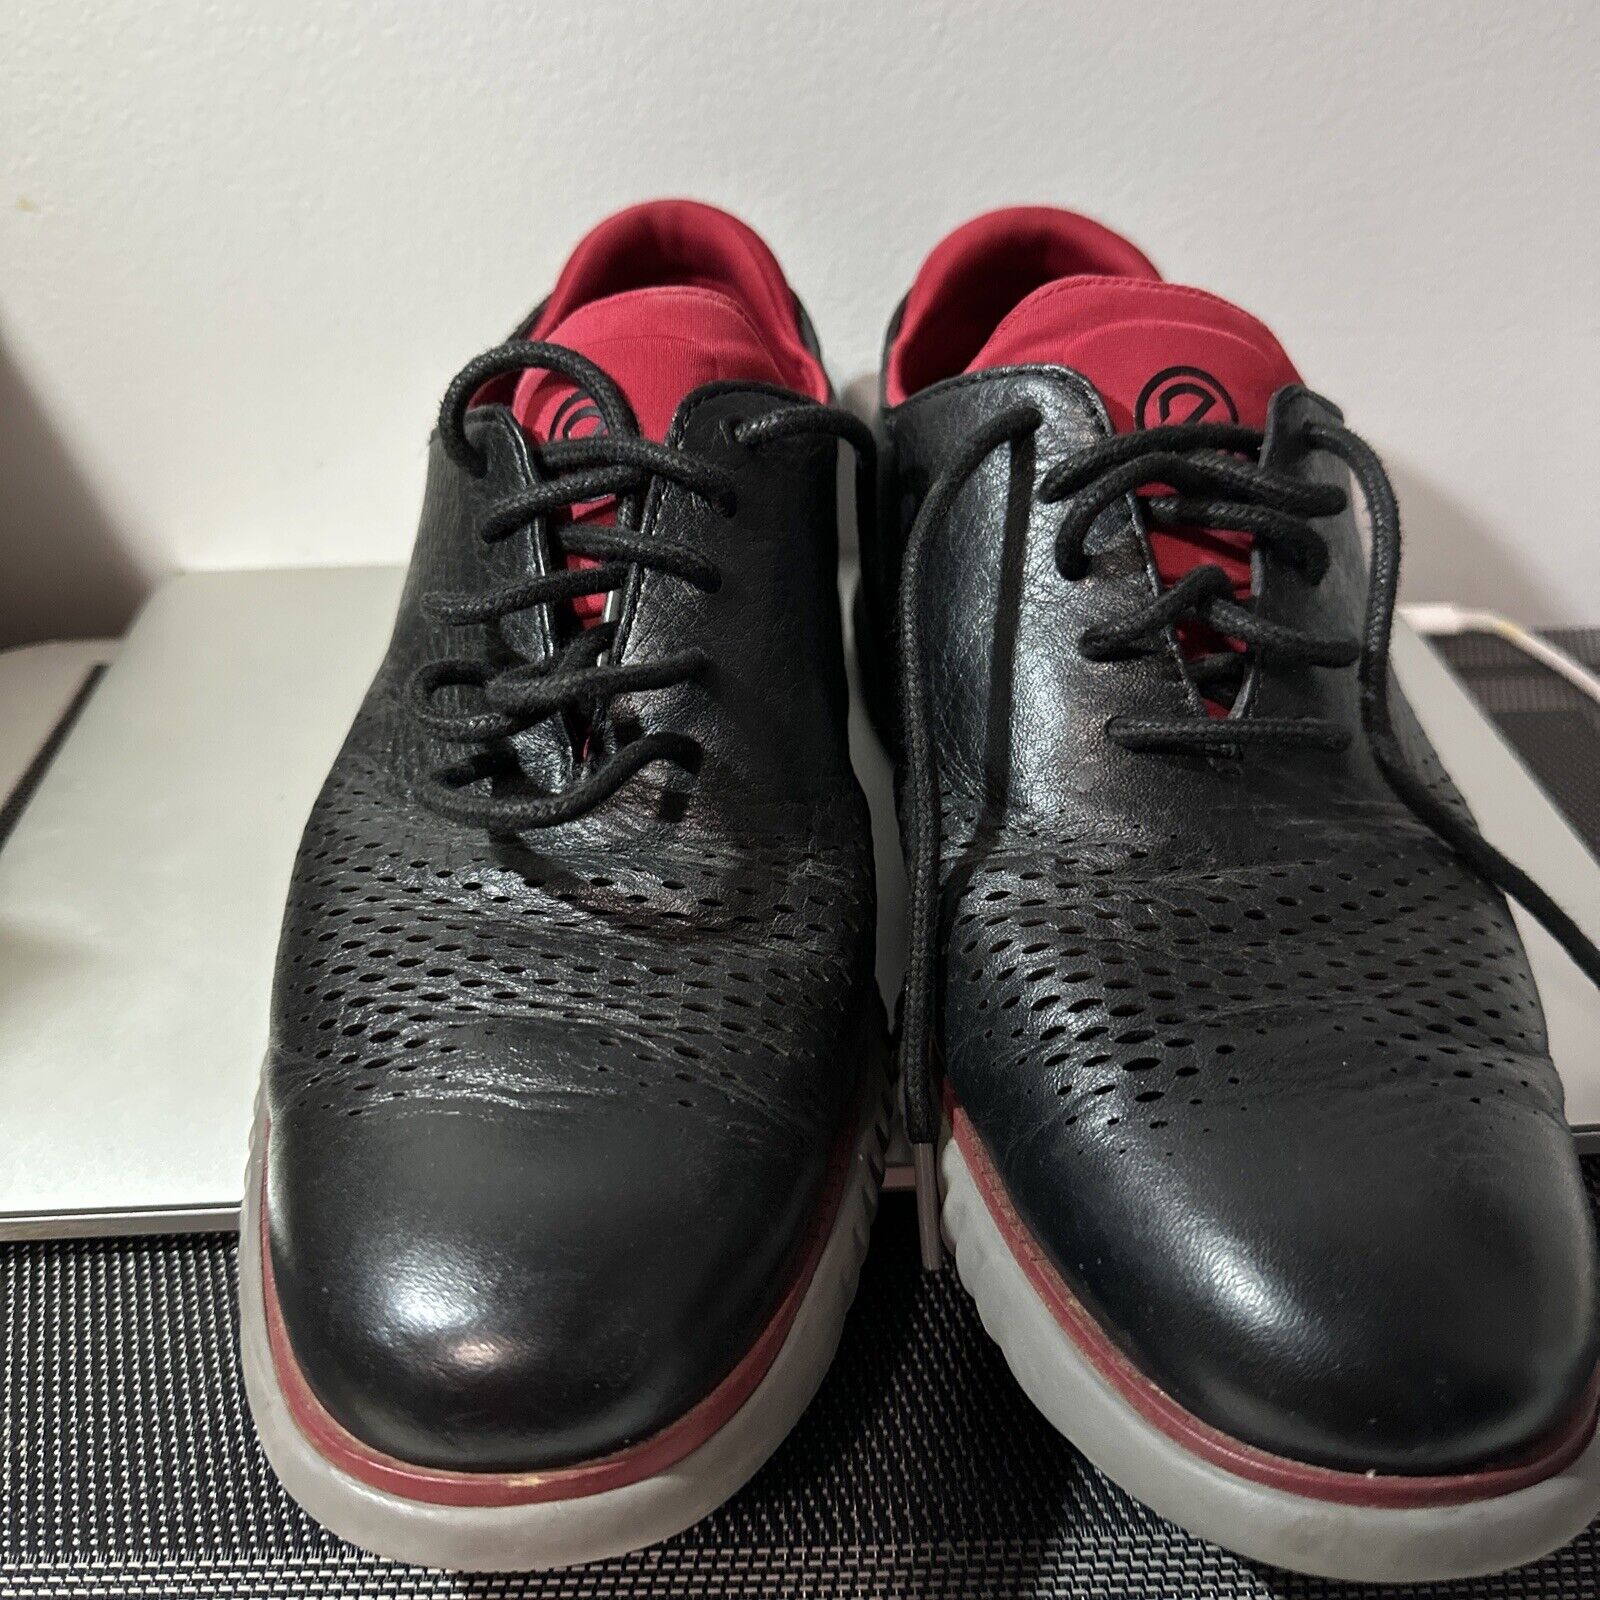 Cole Haan 2.Zerogrand Size 9.5 M Laser Wingtip Oxford Black/Red/Charcoal C34497